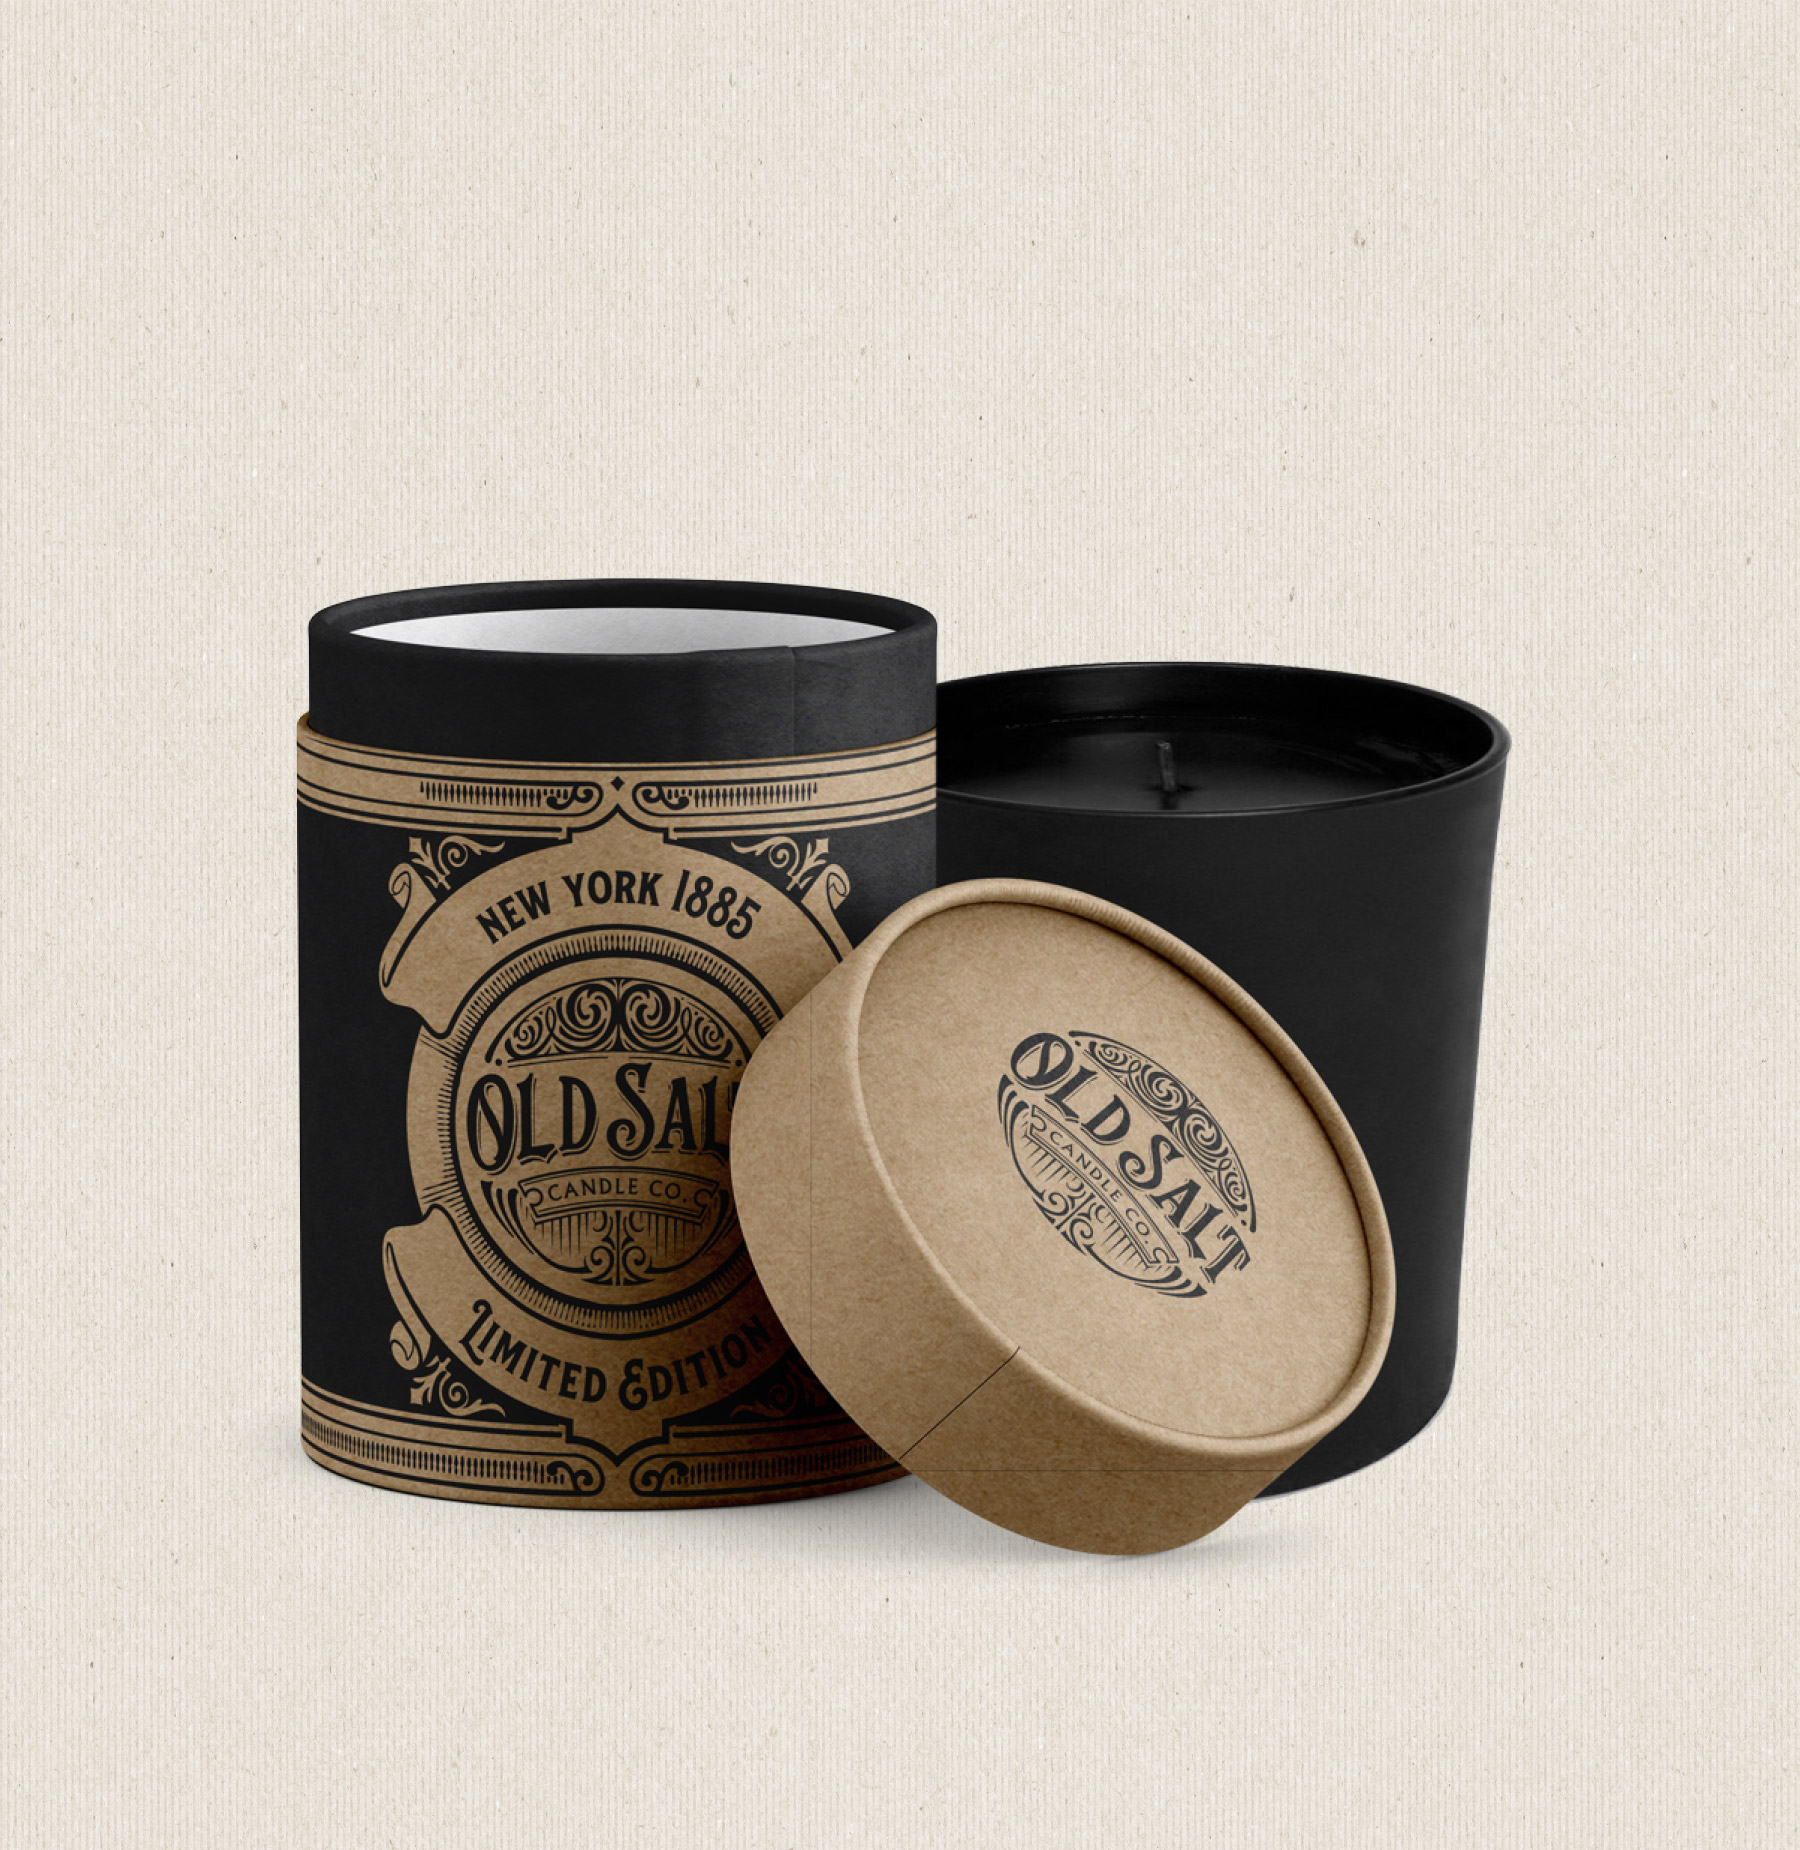 New York 1855 Limited Edition Candle Packaging